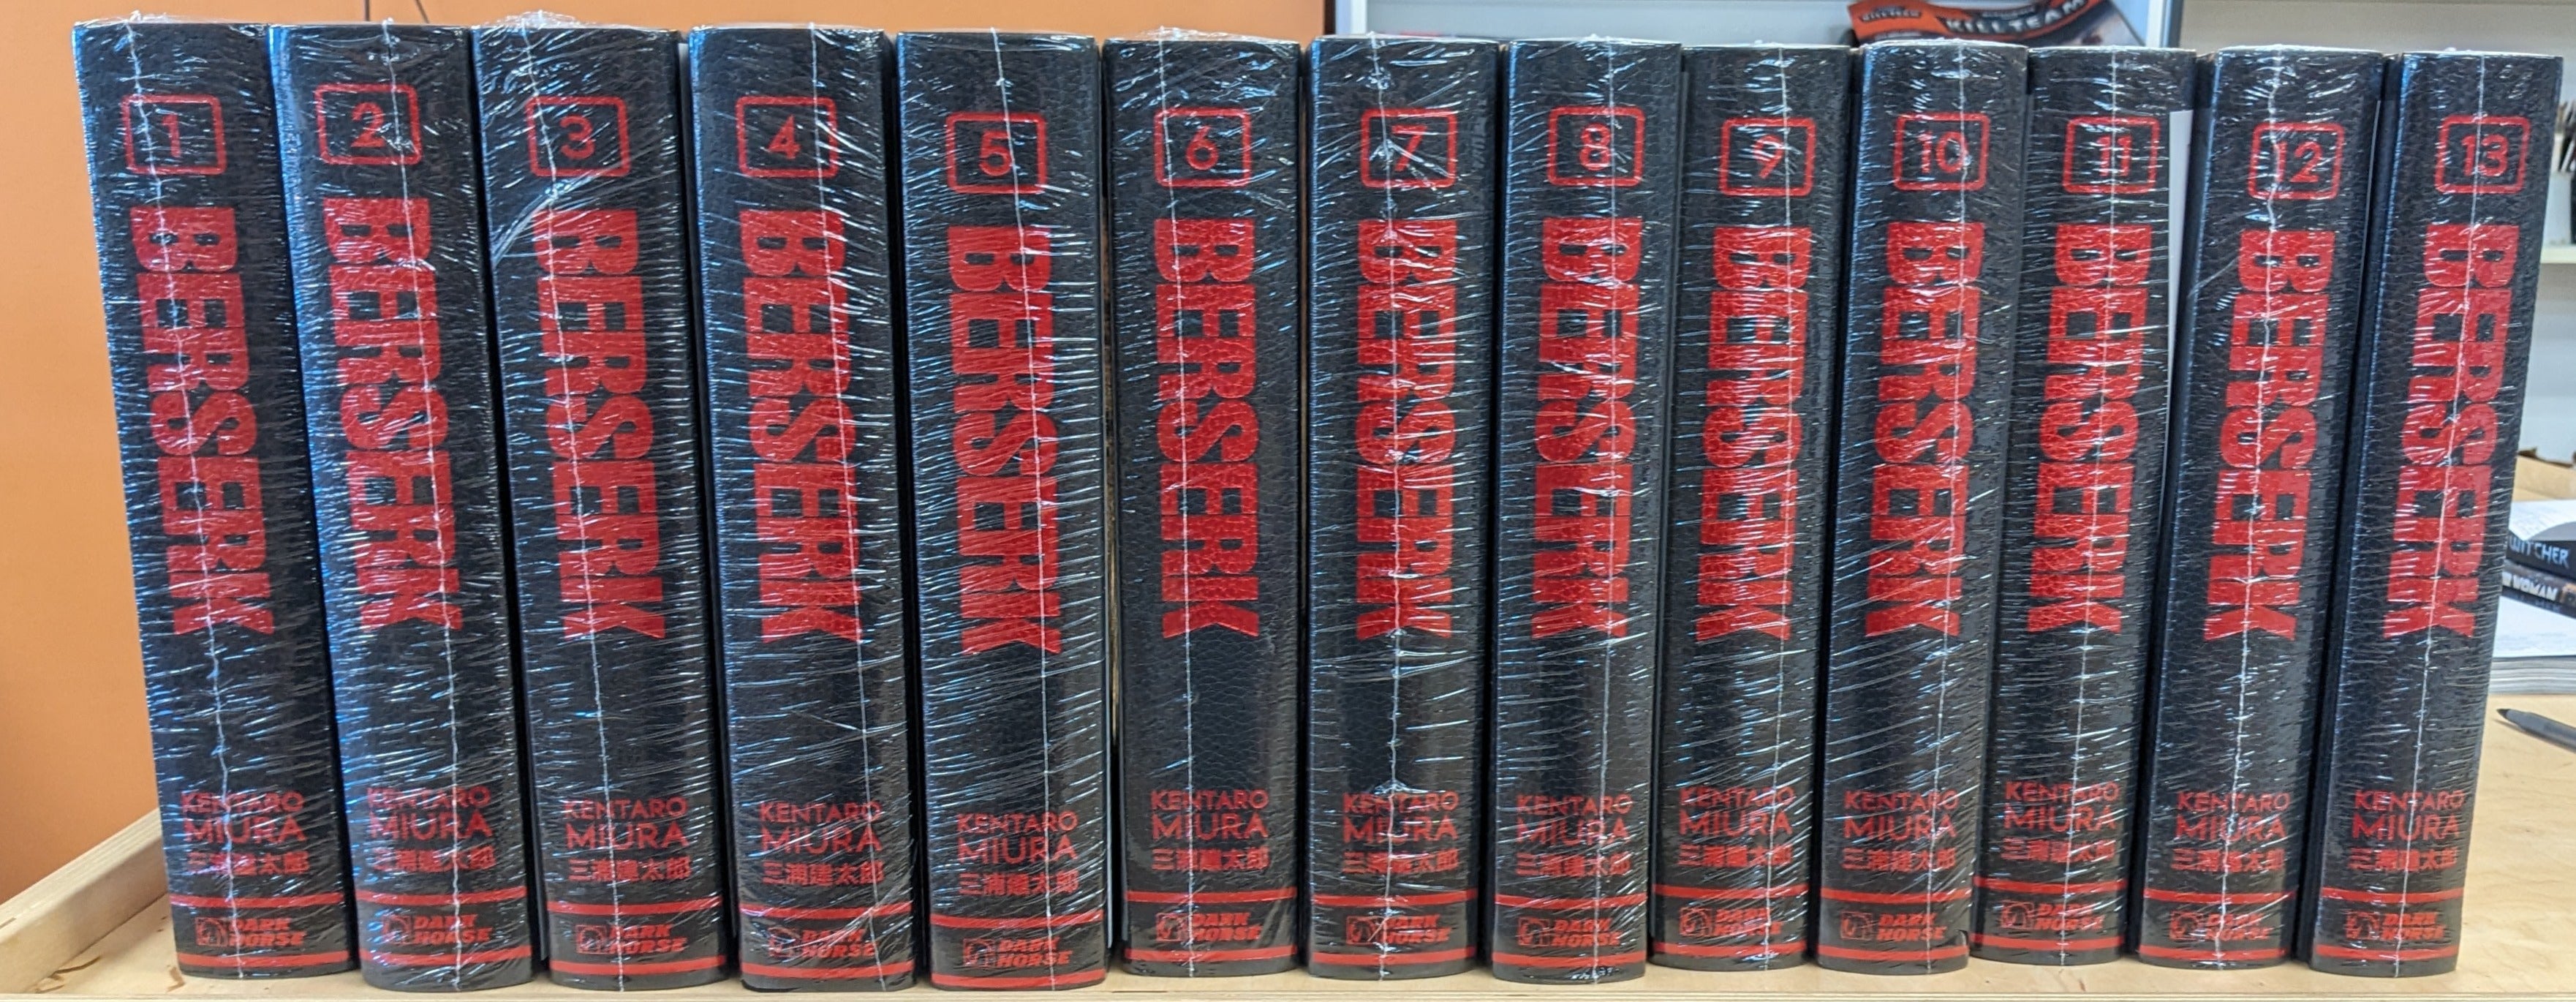 Berserk Deluxe Edition Hardcover Volume 1-14 New Sealed - Made to Order